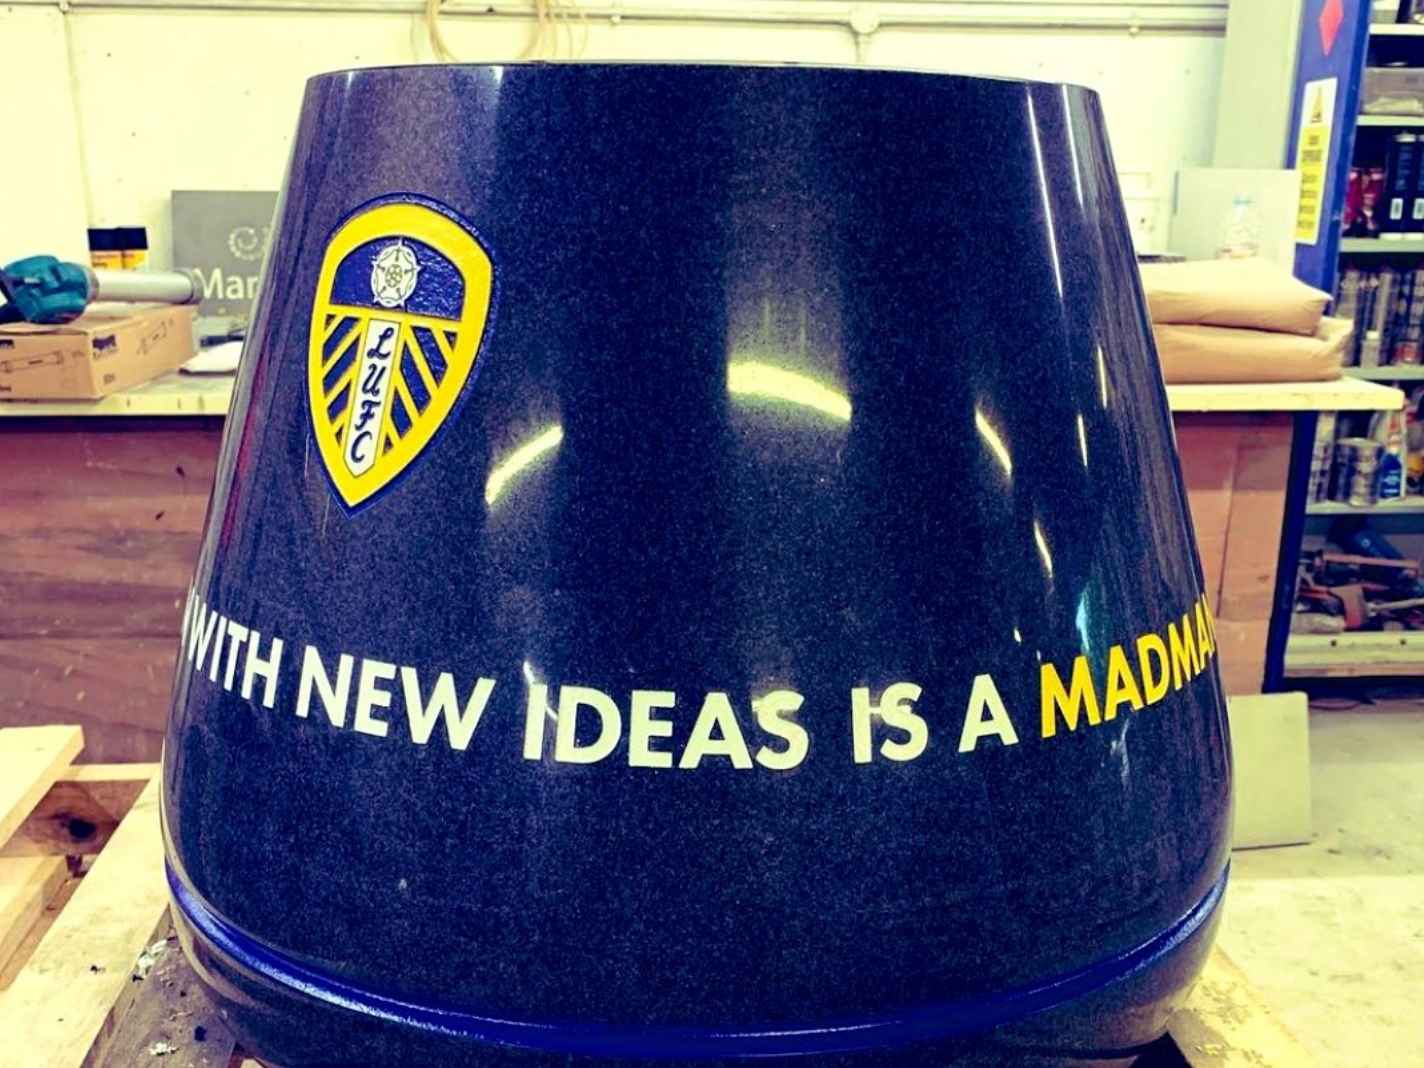 Leeds fans disagree with plans to honour Bielsa with bucket